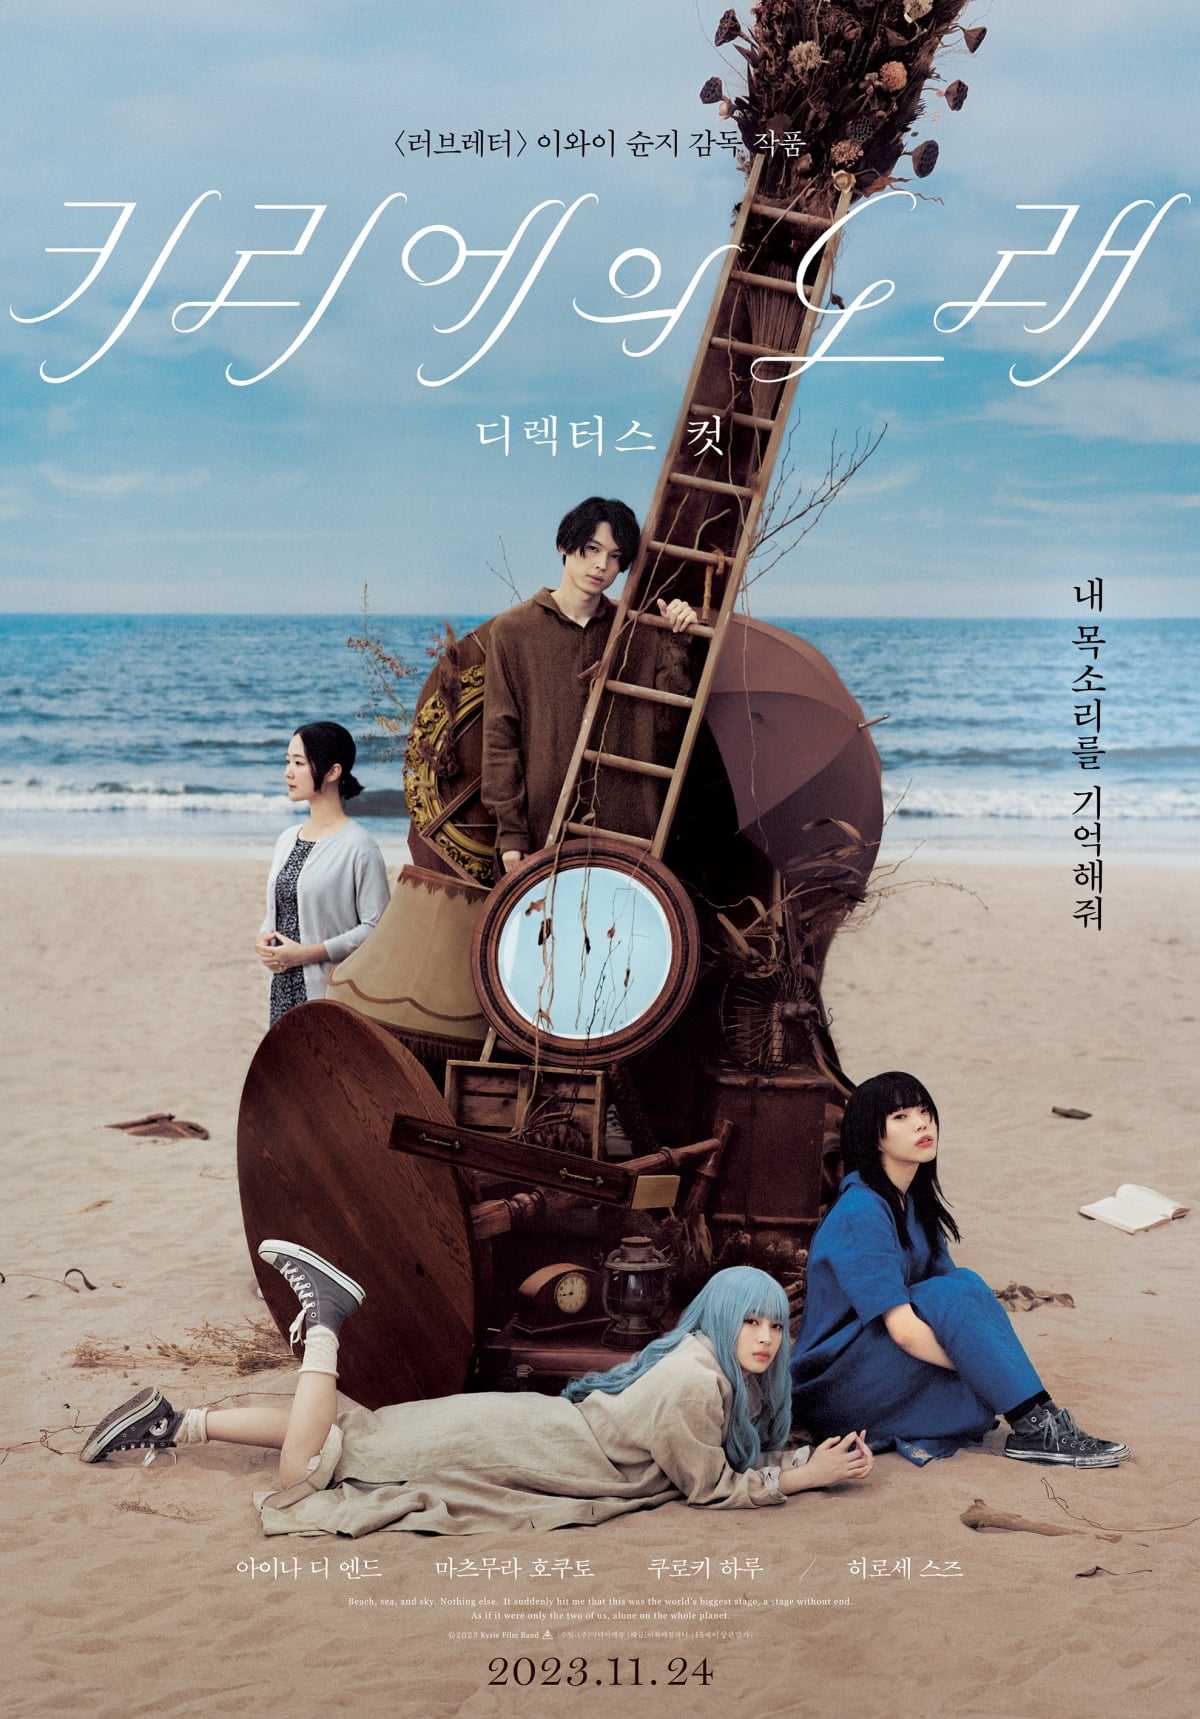 Movie ‘Kyrie’s Song’, 178-minute director’s cut version to be released on the 24th